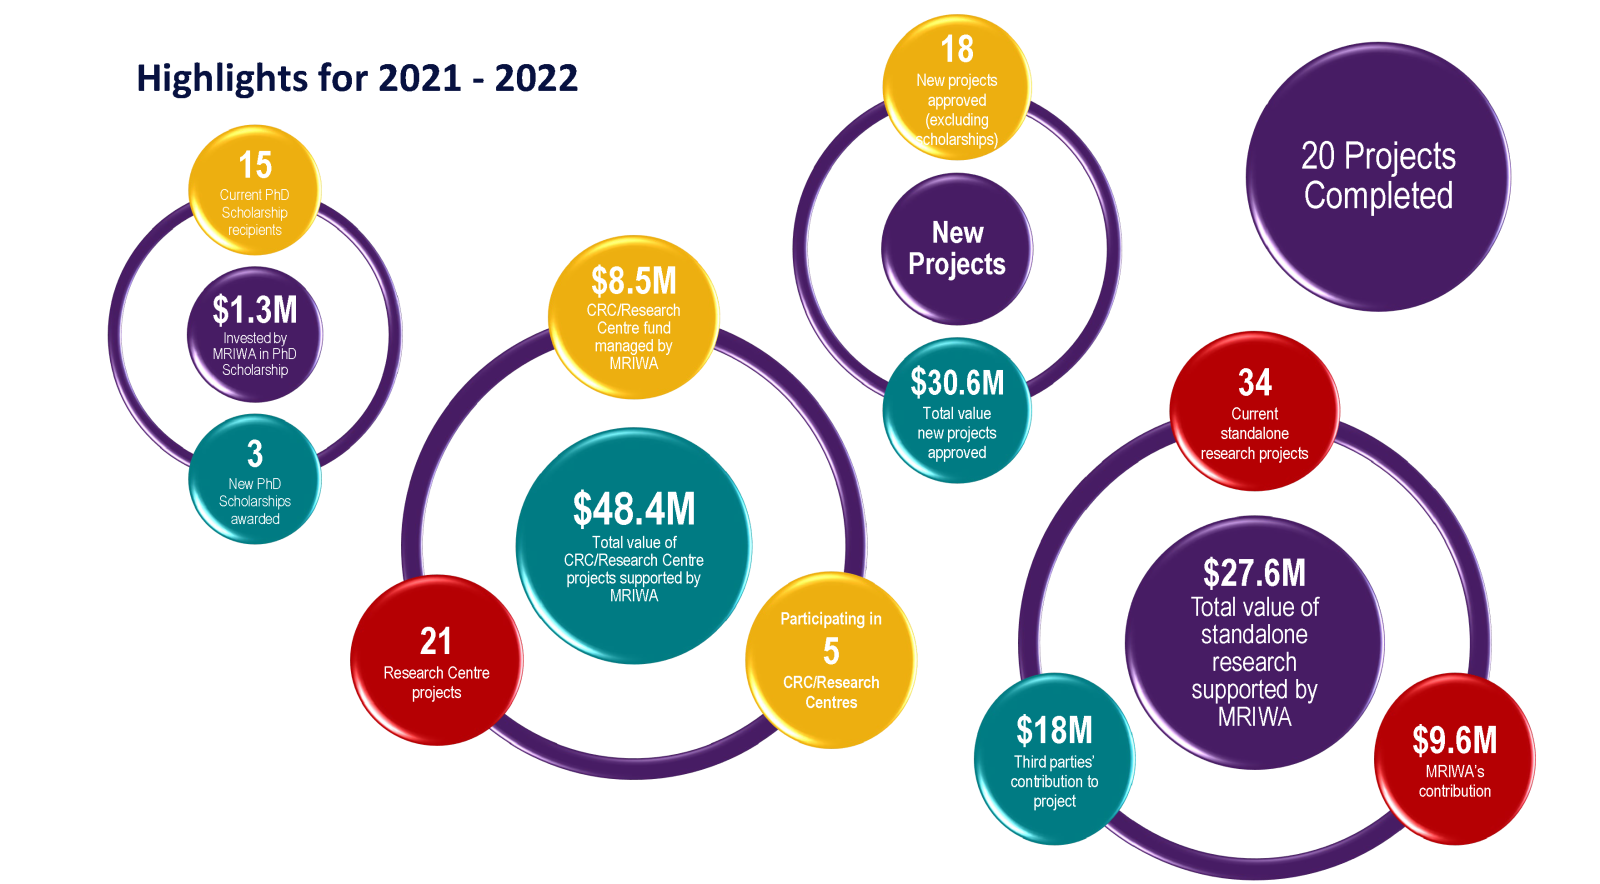 Image taken from Annual Report outlining MRIWA's research portfolio statistics